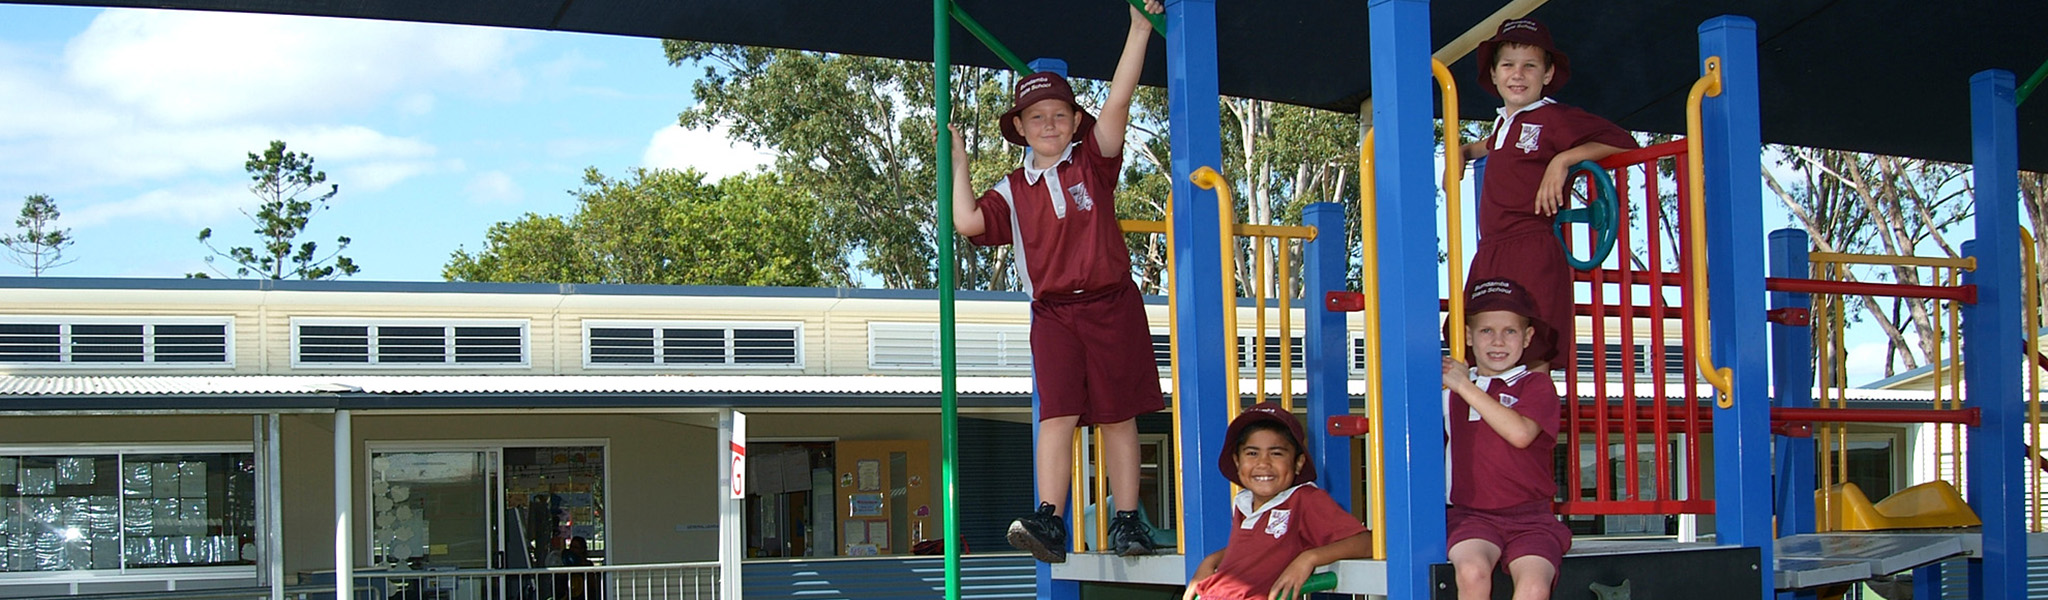 Students in undercover playground